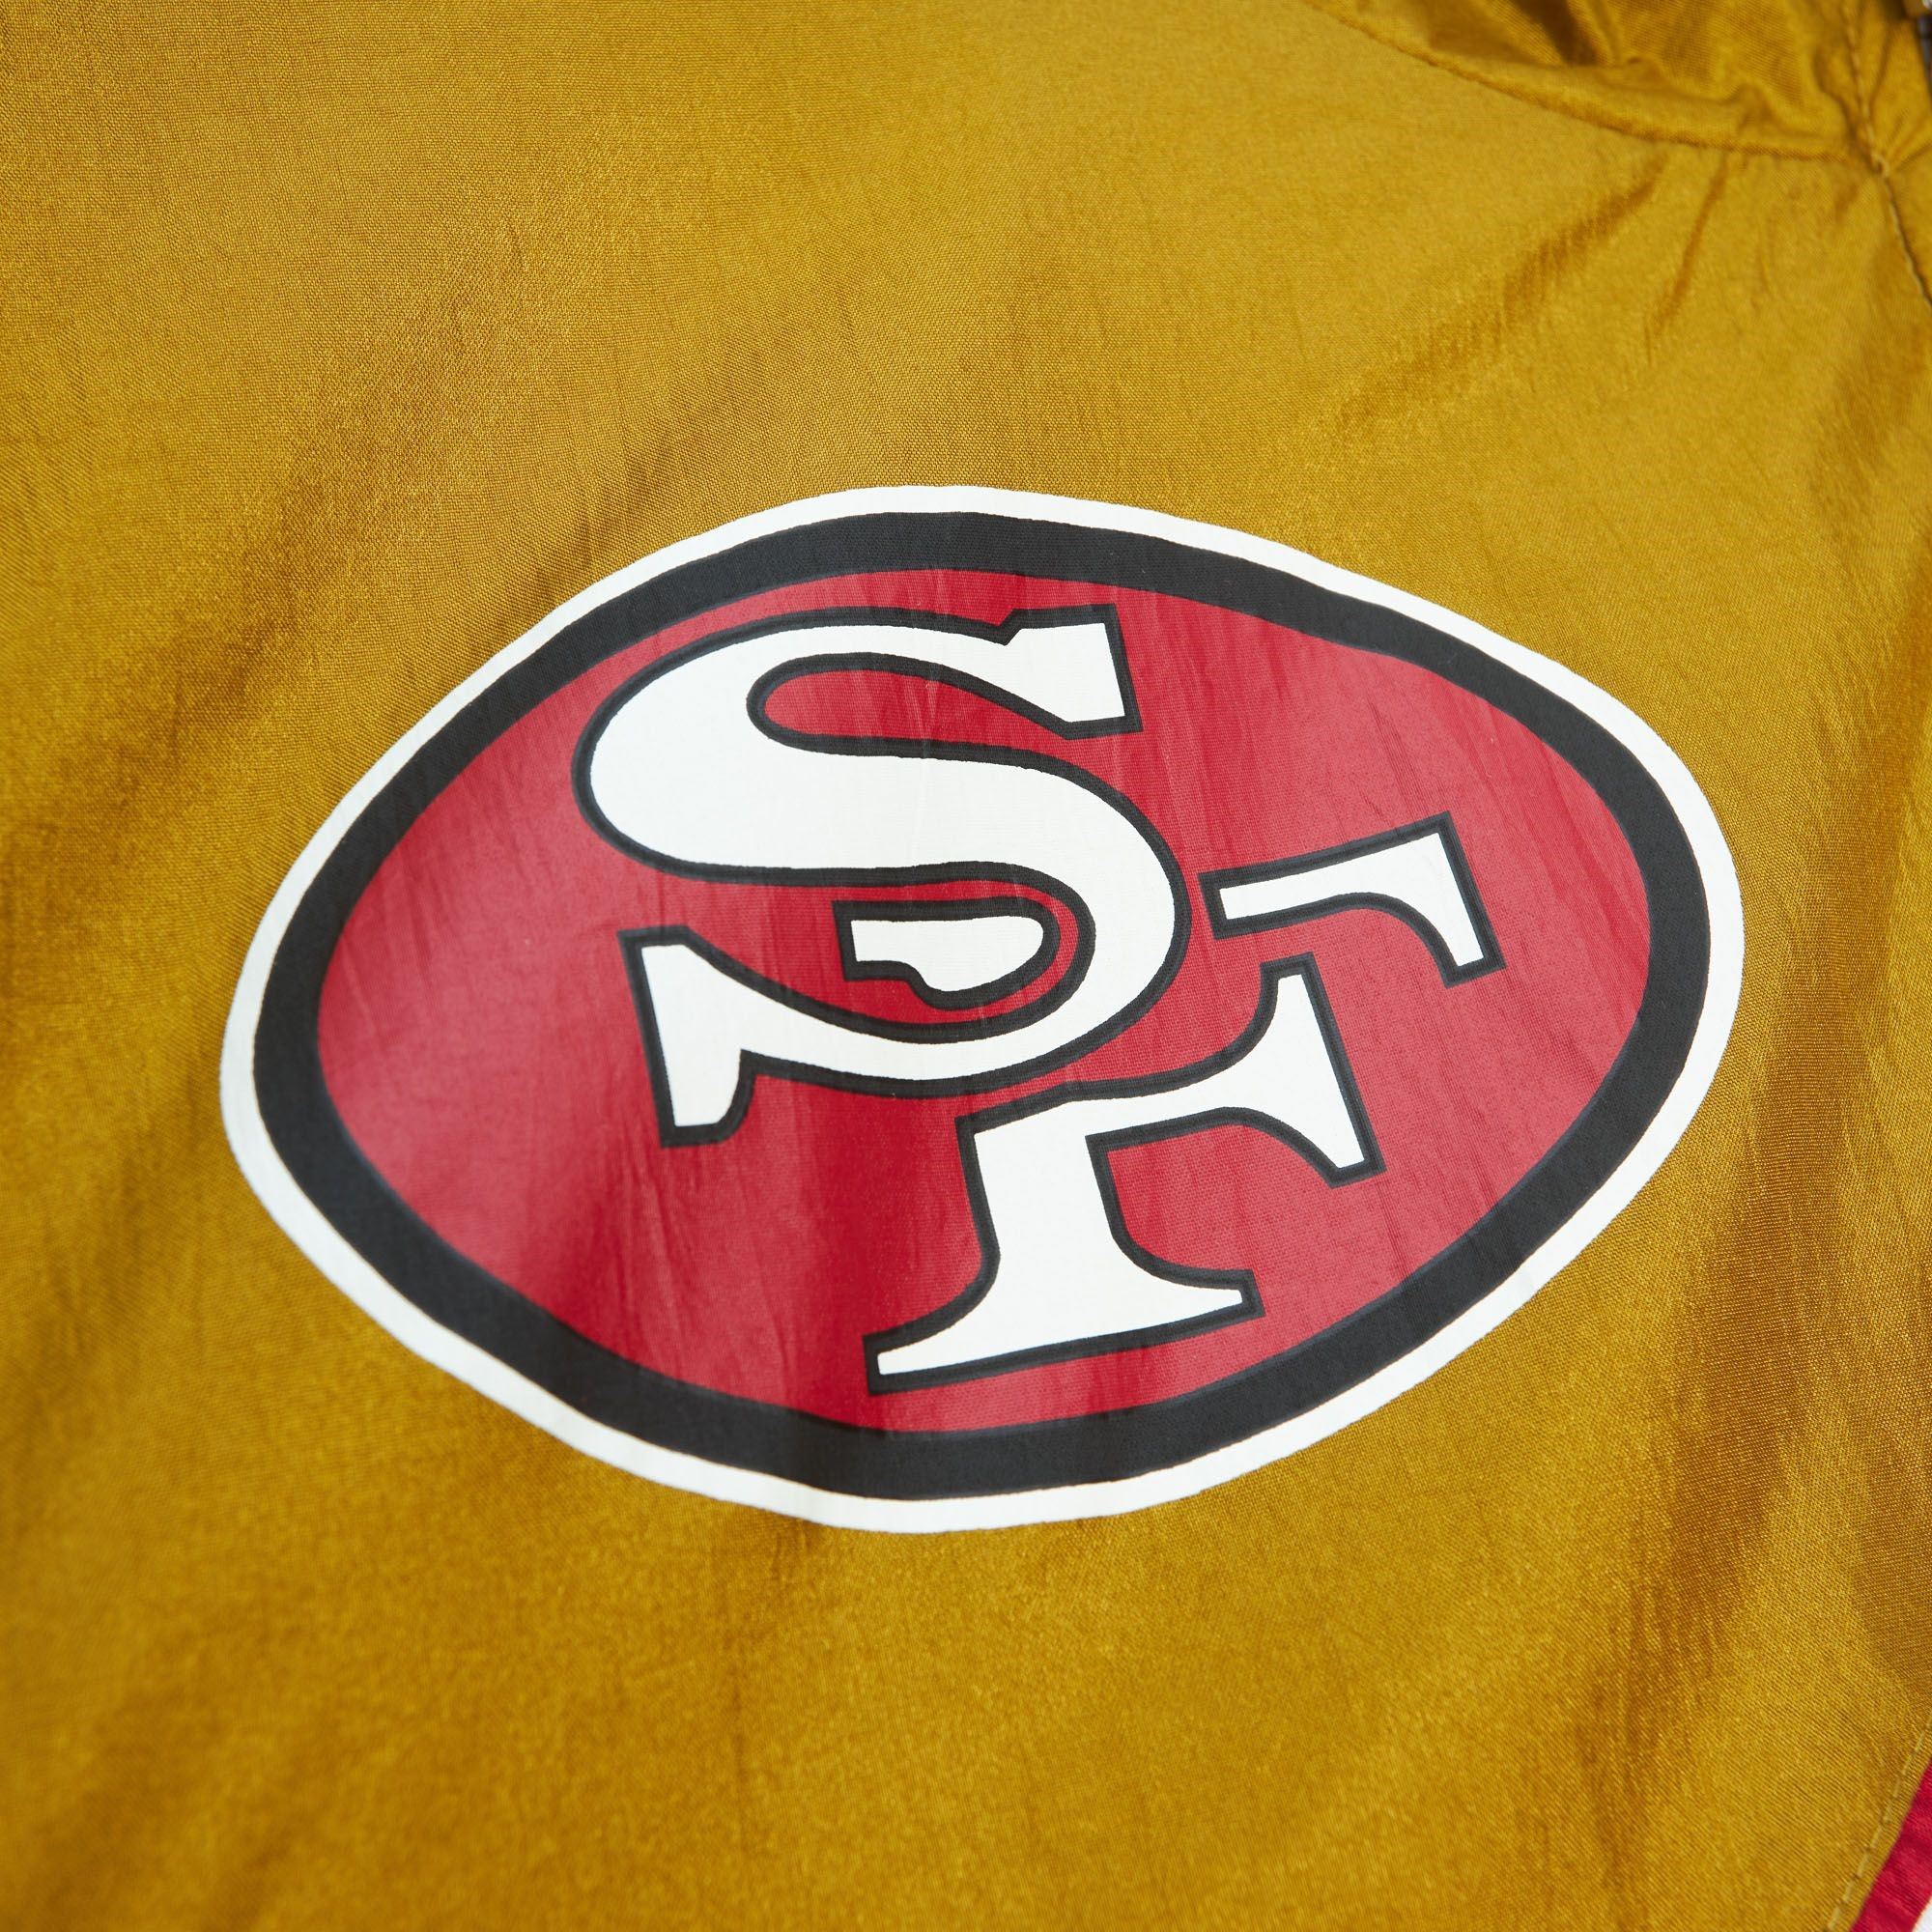 San Francisco 49ers NFL Arched Retro Lined Windbreaker Red Gold Jacke Mitchell & Ness